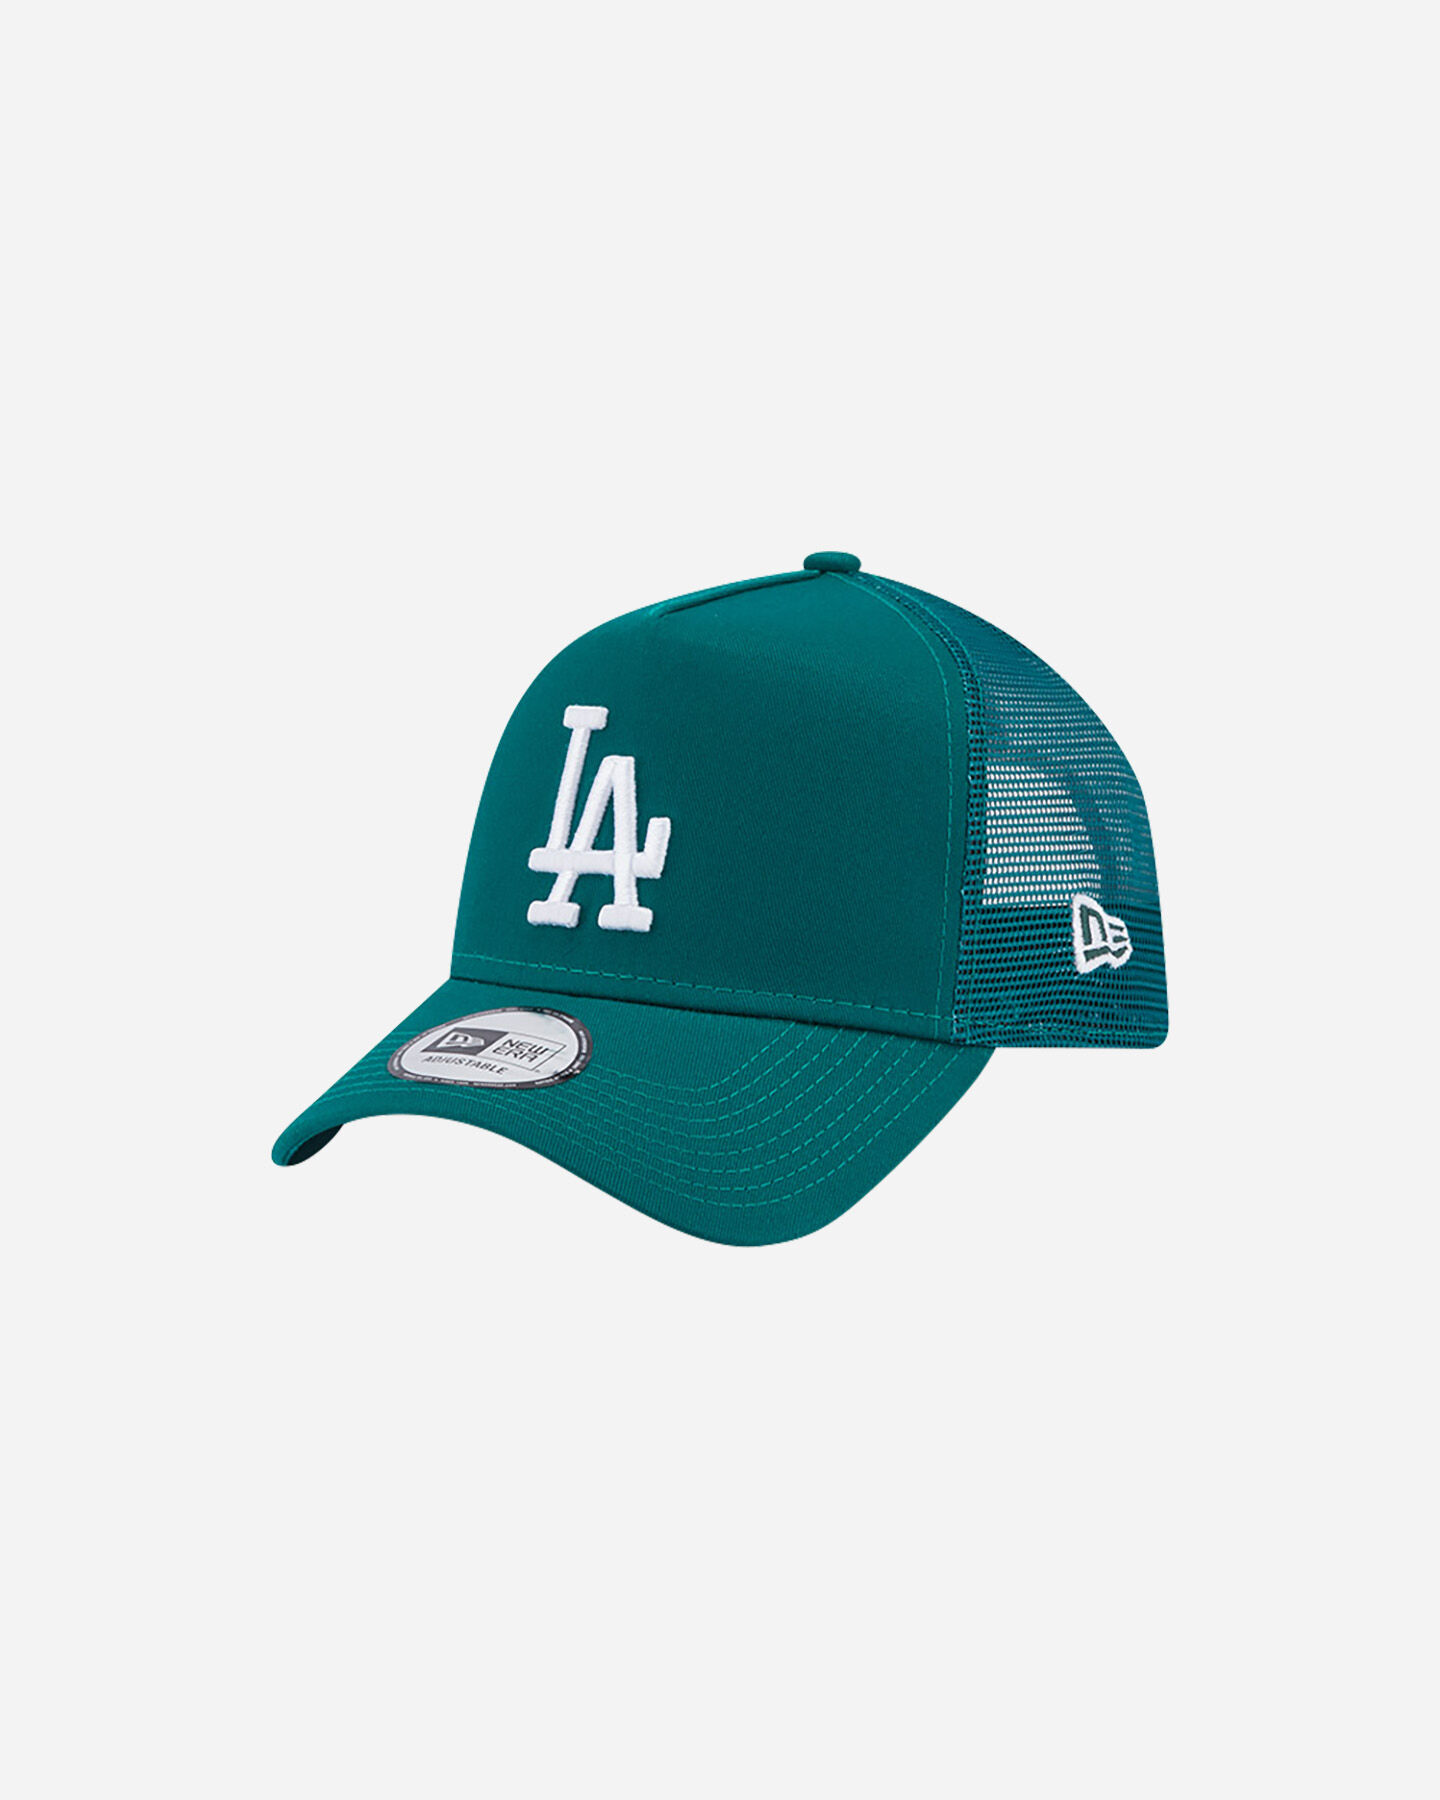  Cappellino NEW ERA 9FORTY TRUCKER MLB LEAGUE LOS ANGELES DODGERS  S5606269|301|OSFM scatto 0